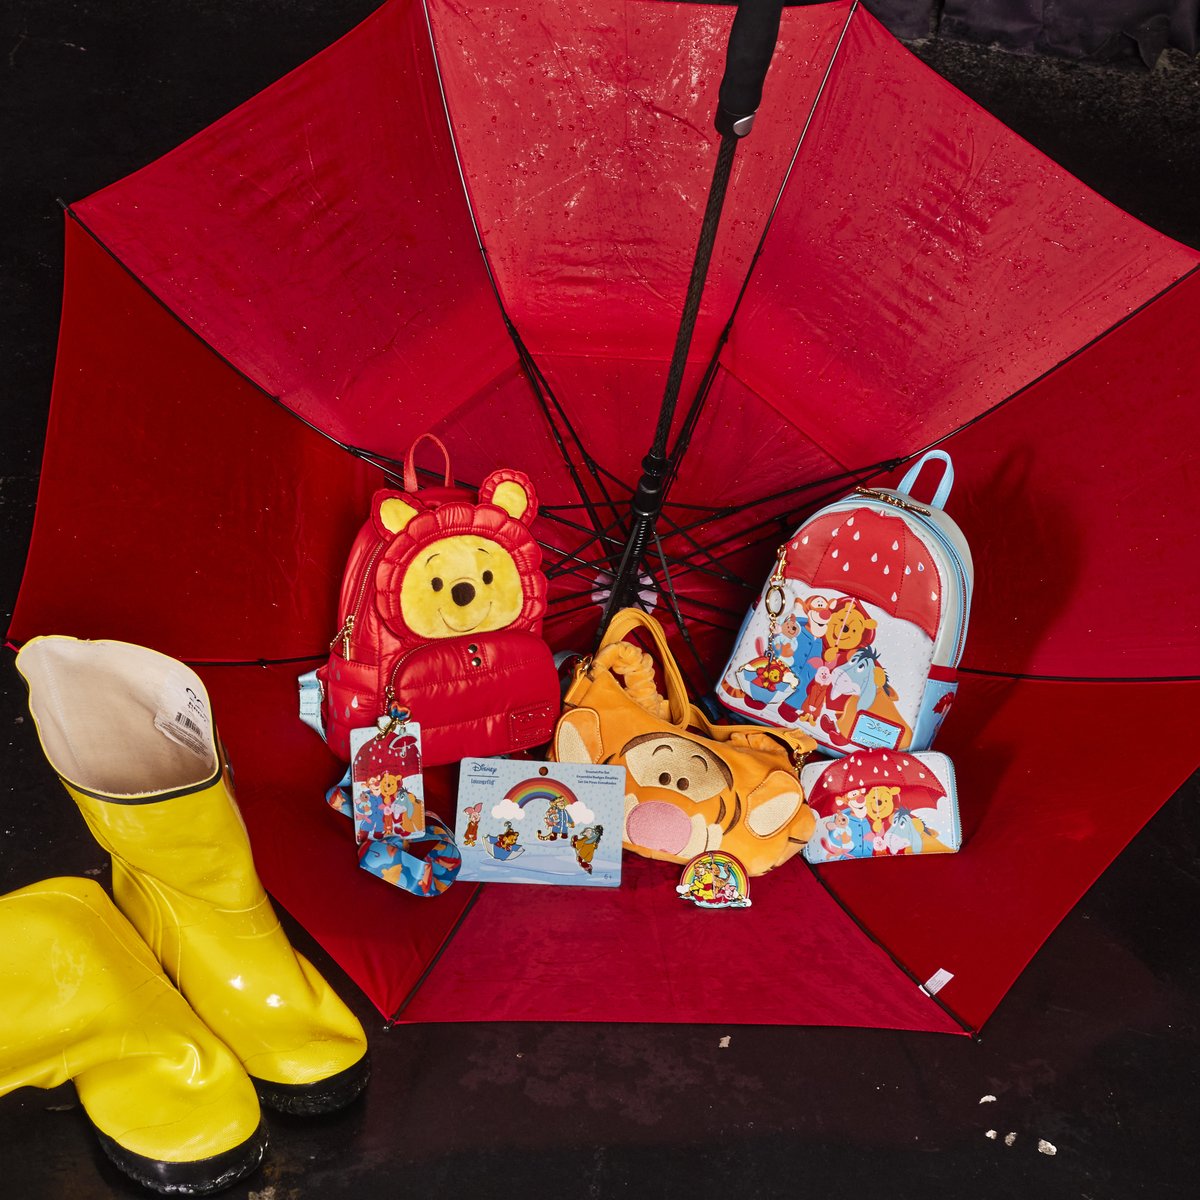 Our Winnie the Pooh Rainy Day collection will be drip-dropping on 11/1 at 9am PDT. ☔: Sign up at tinyurl.com/Pooh-Rainy-Day